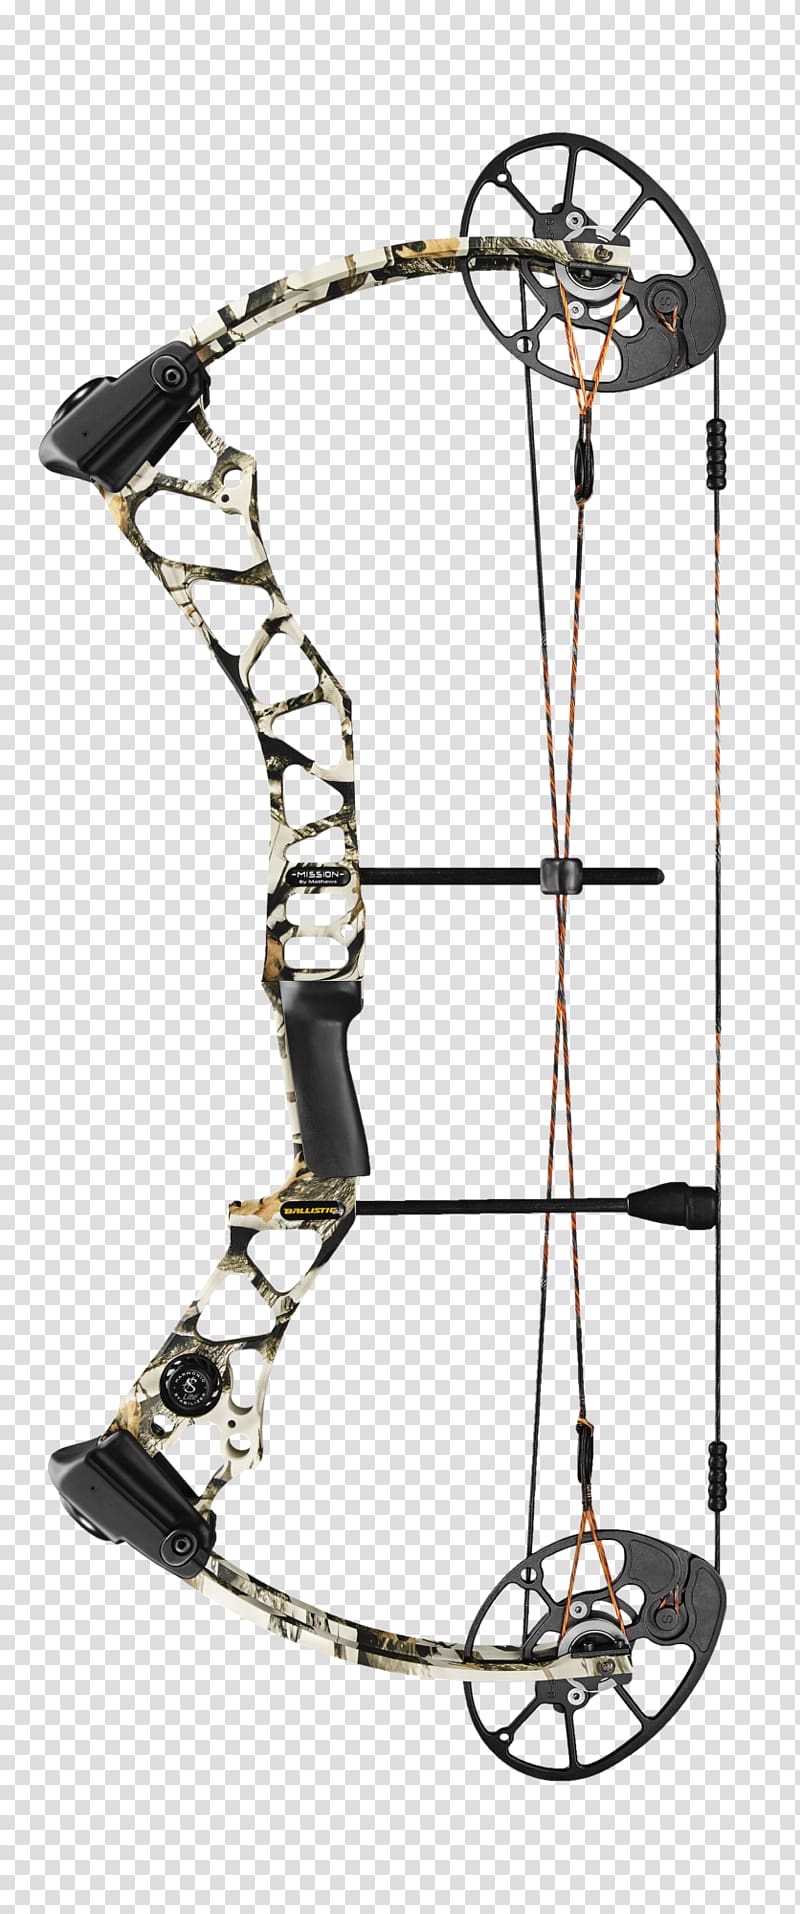 Bow and arrow Compound Bows Bowhunting Archery, MISSION transparent background PNG clipart